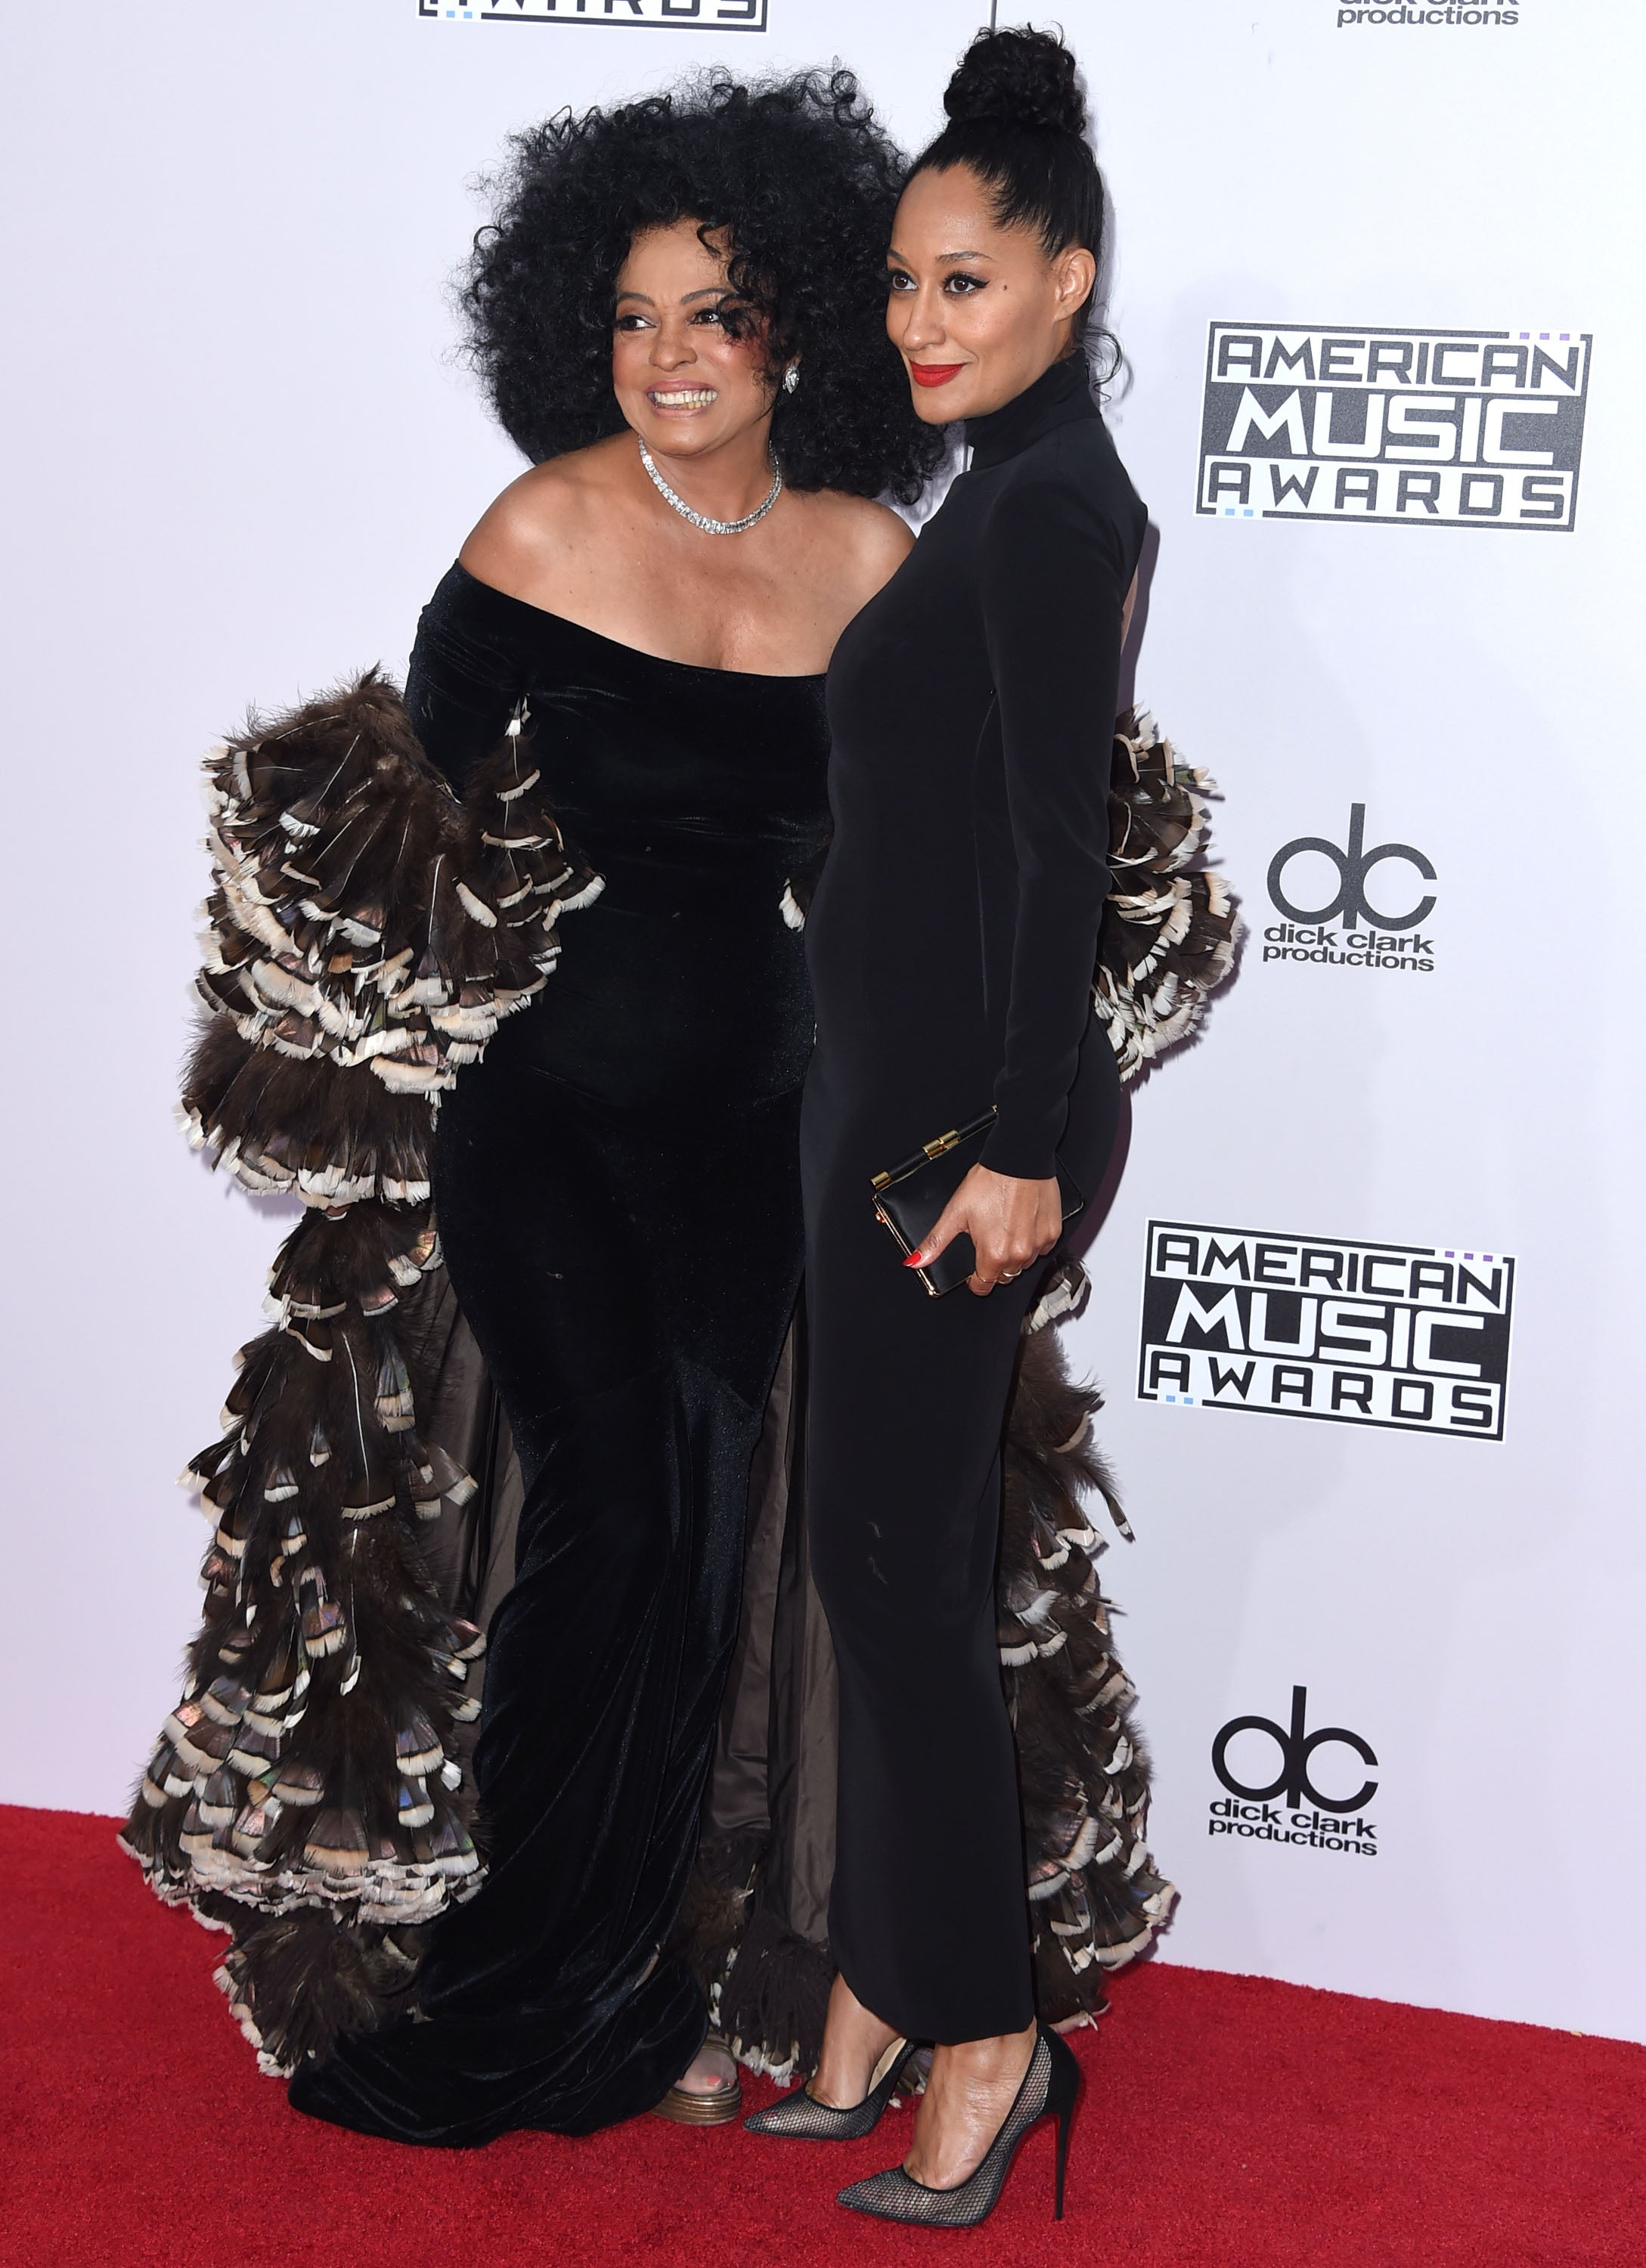 Tracee Ellis Ross Joins Mom Diana Ross on Stage to Sing 'Lady Sings the Blues'
